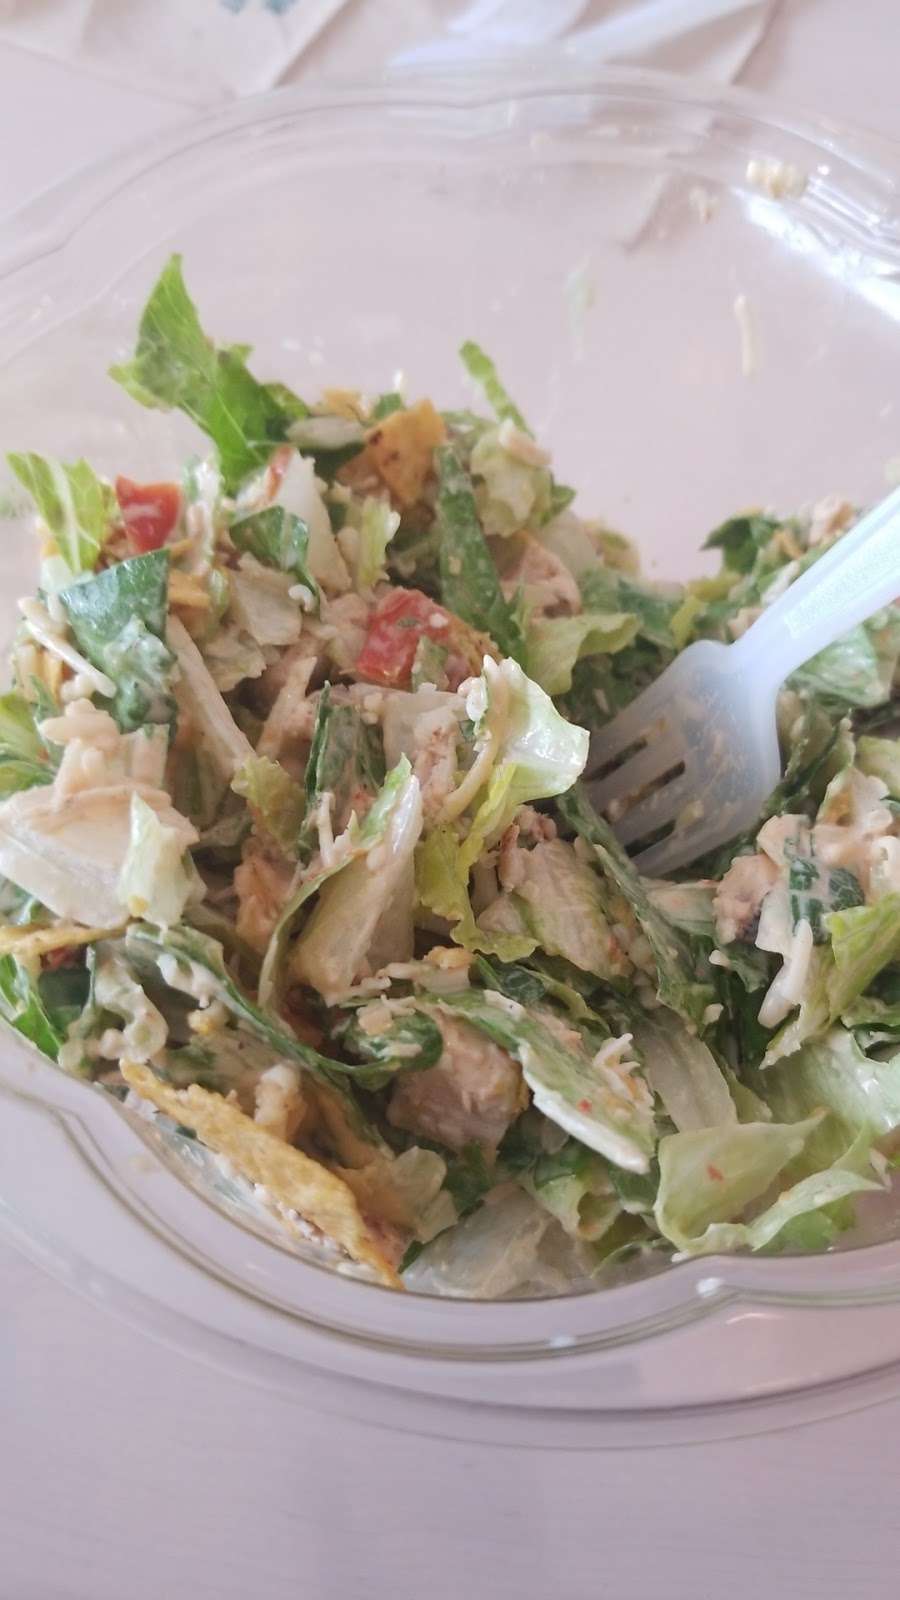 Chopt Creative Salad Co. | 1062 Wilmot Rd, Scarsdale, NY 10583 | Phone: (914) 472-7501